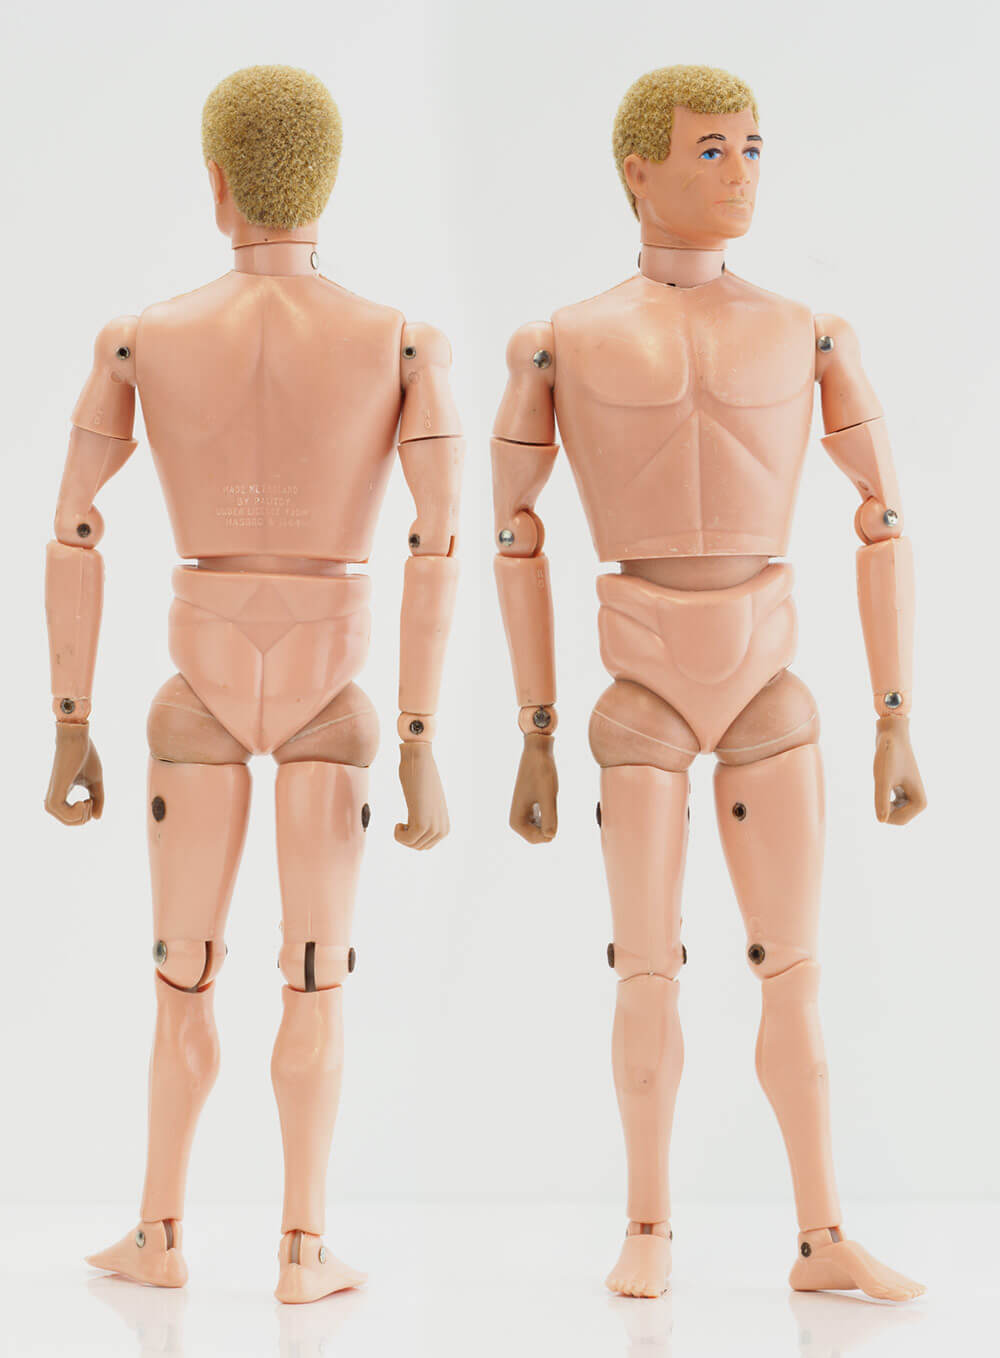 new action man figures